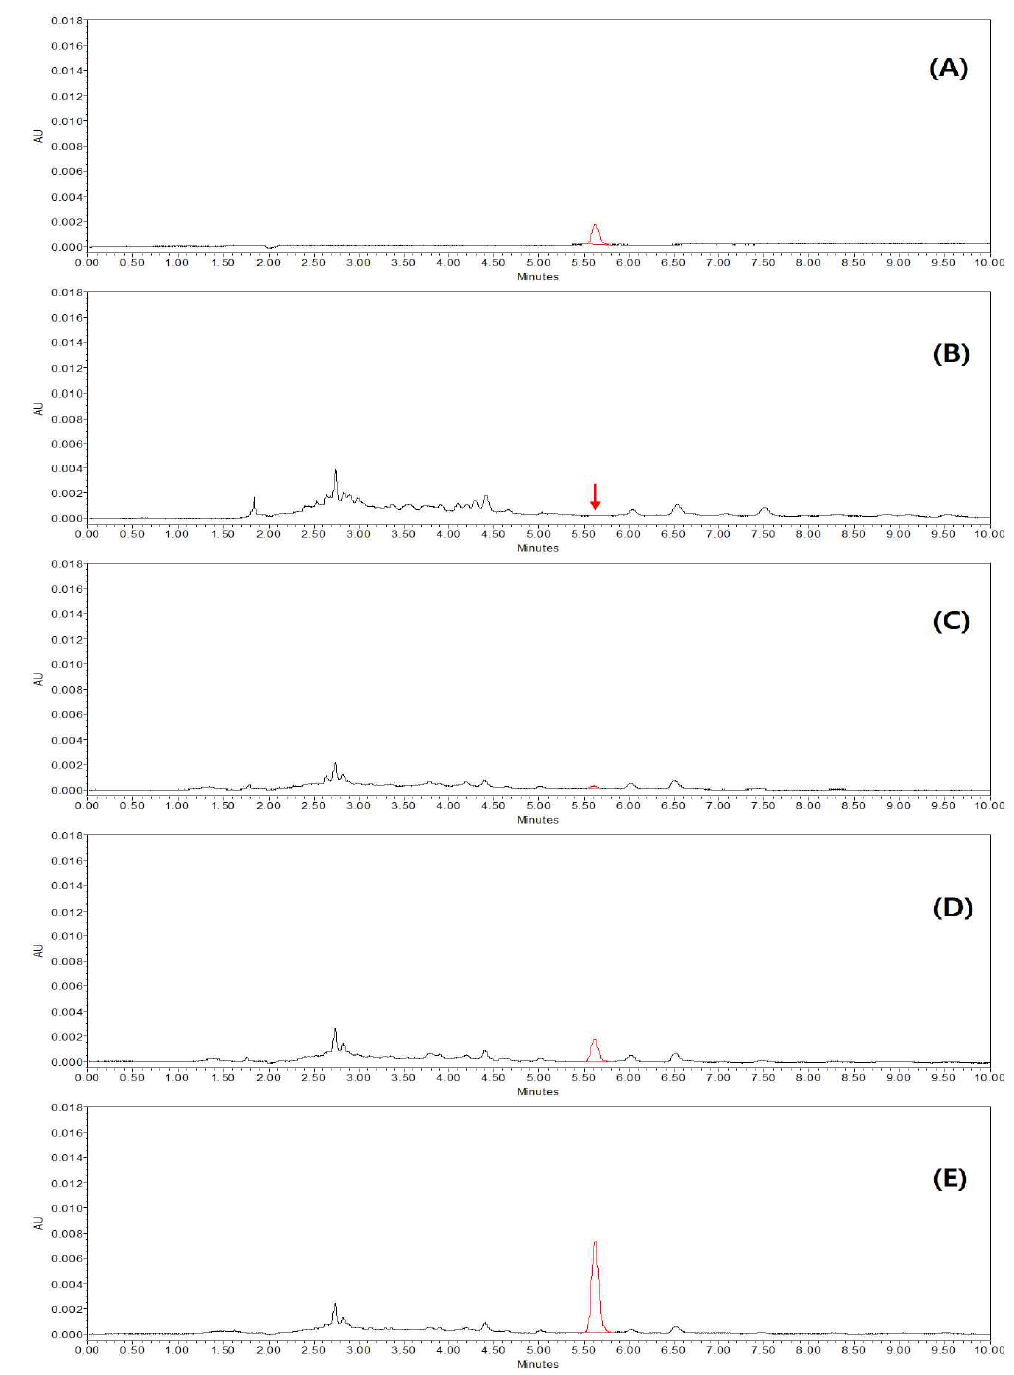 HPLC-UV chromatograms corresponding to: A, standard solution at 0.1 mg/kg; B, control hulled rice; C, spiked at 0.01 mg/kg; D, spiked at 0.1 mg/kg; and E, spiked at 0.5 mg/kg